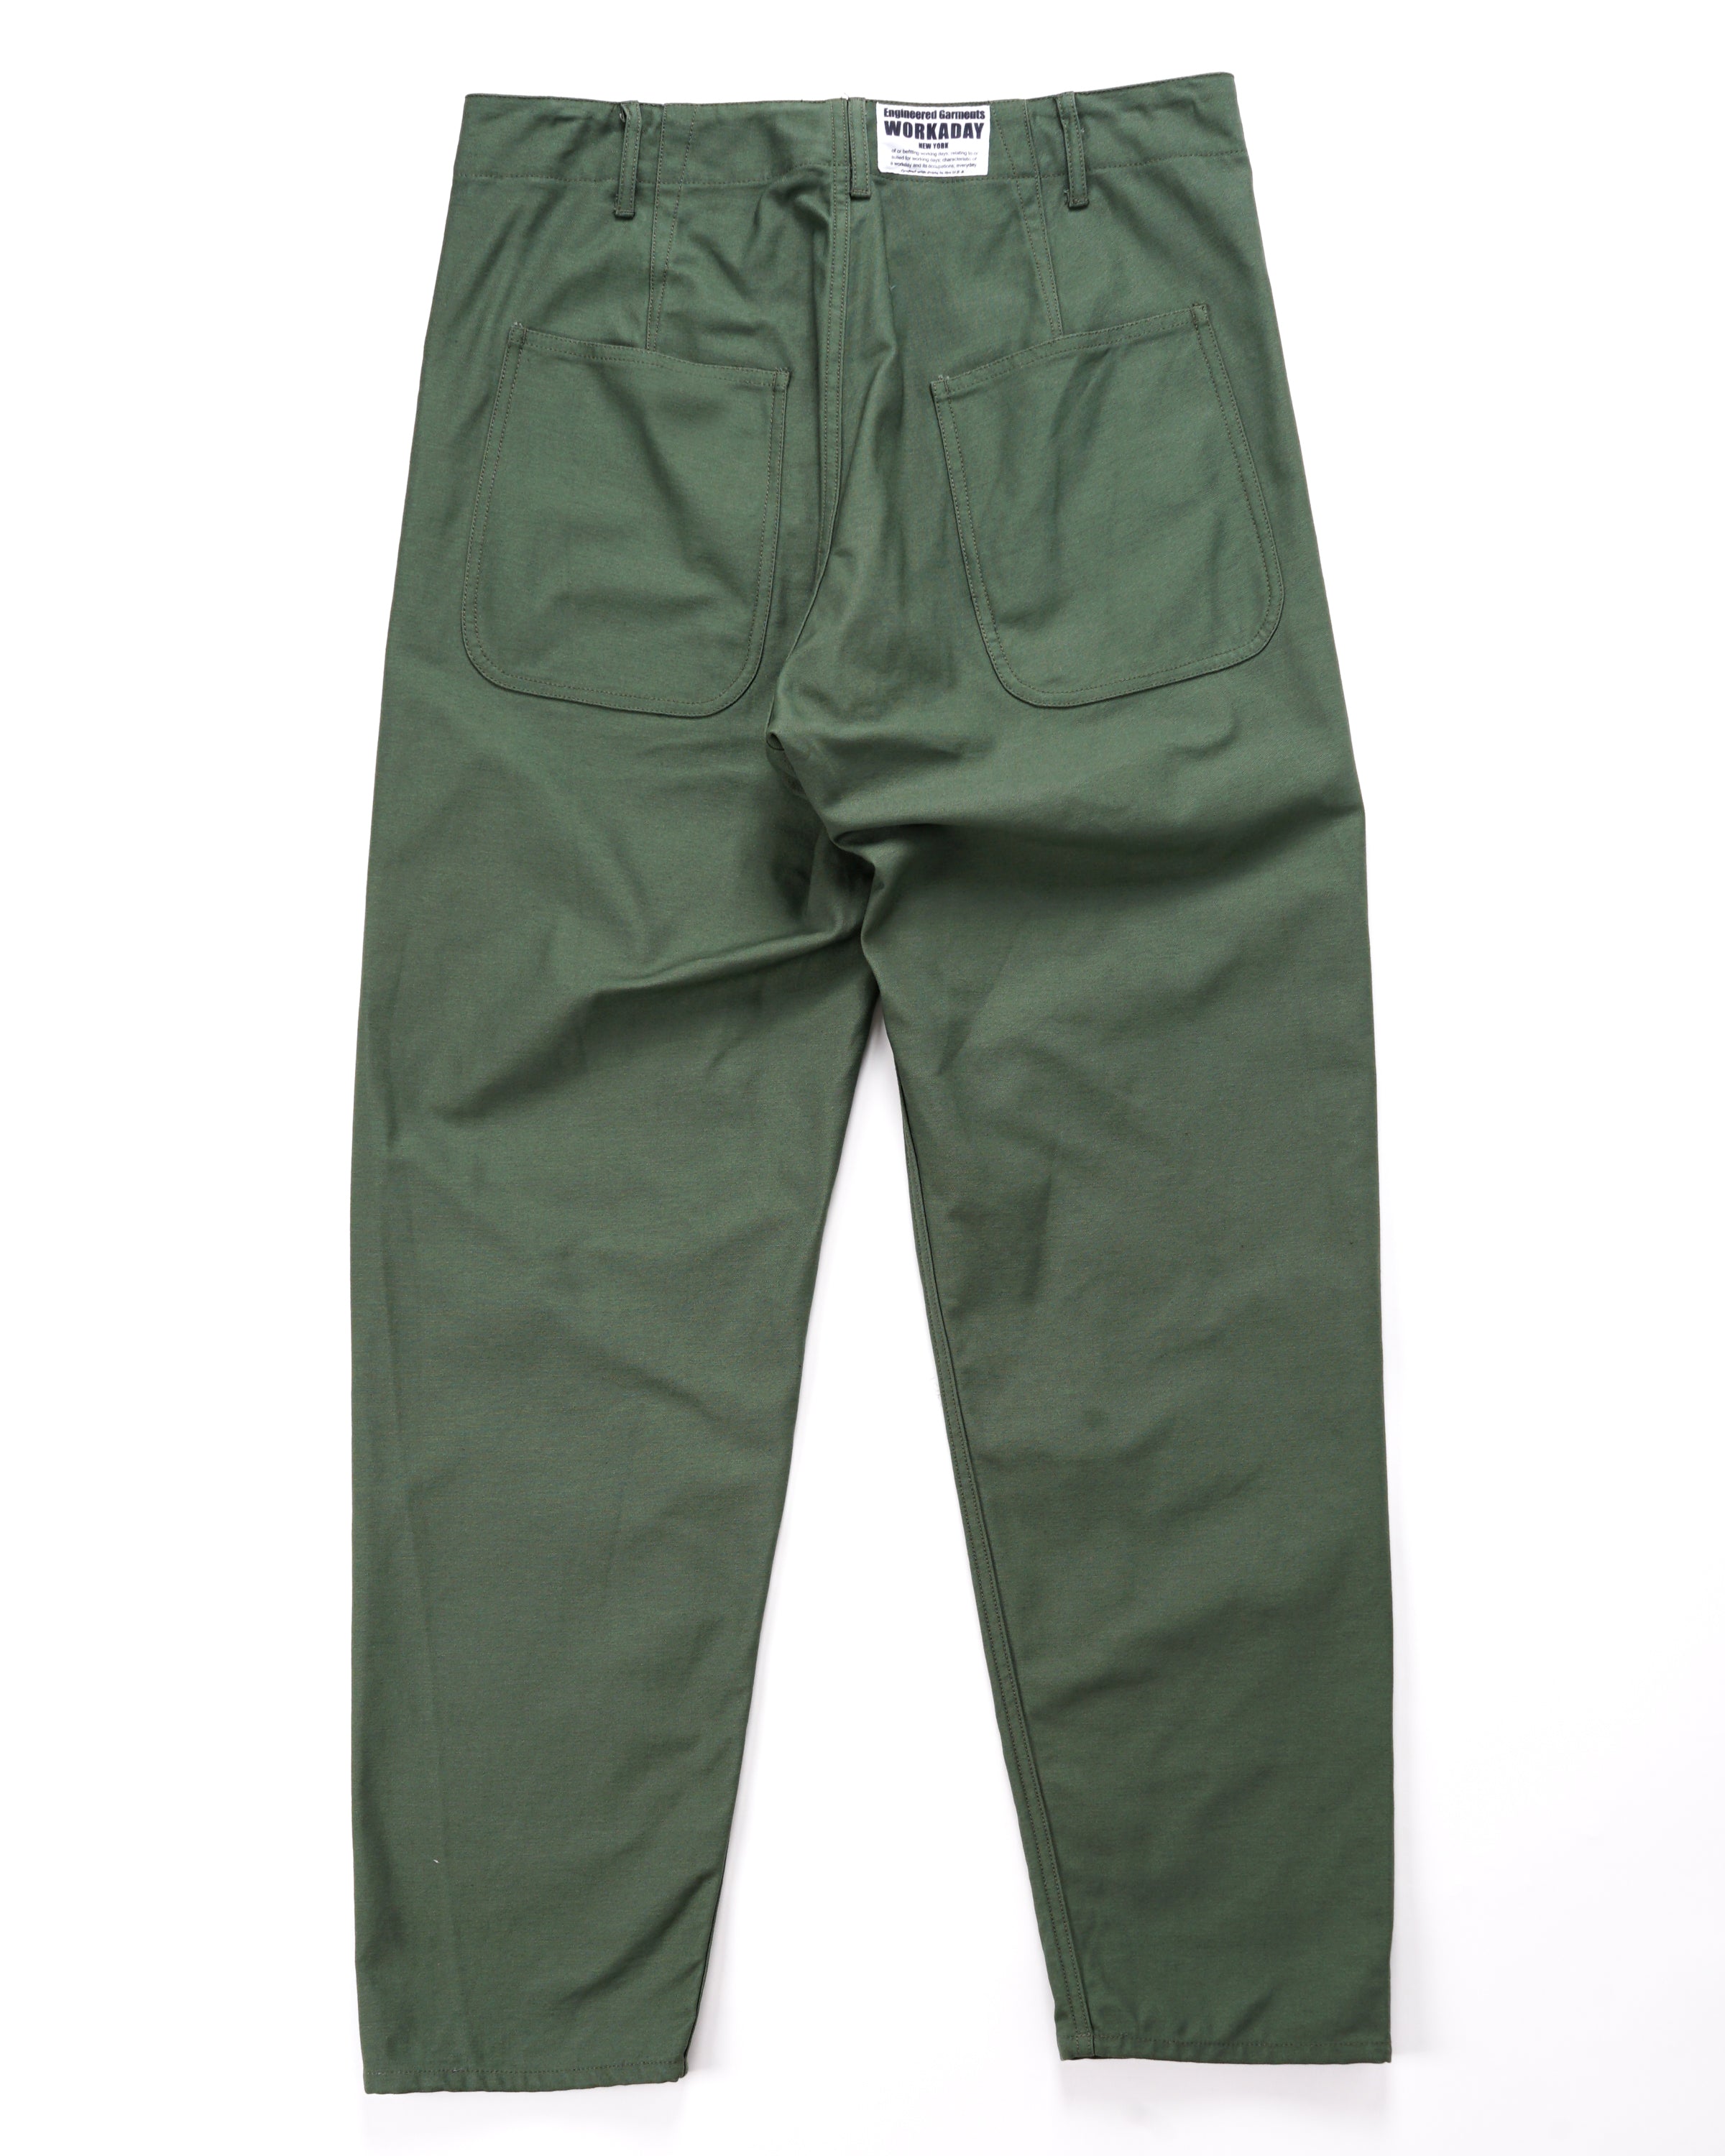 Utility Pant - Olive Cotton Reverse Sateen